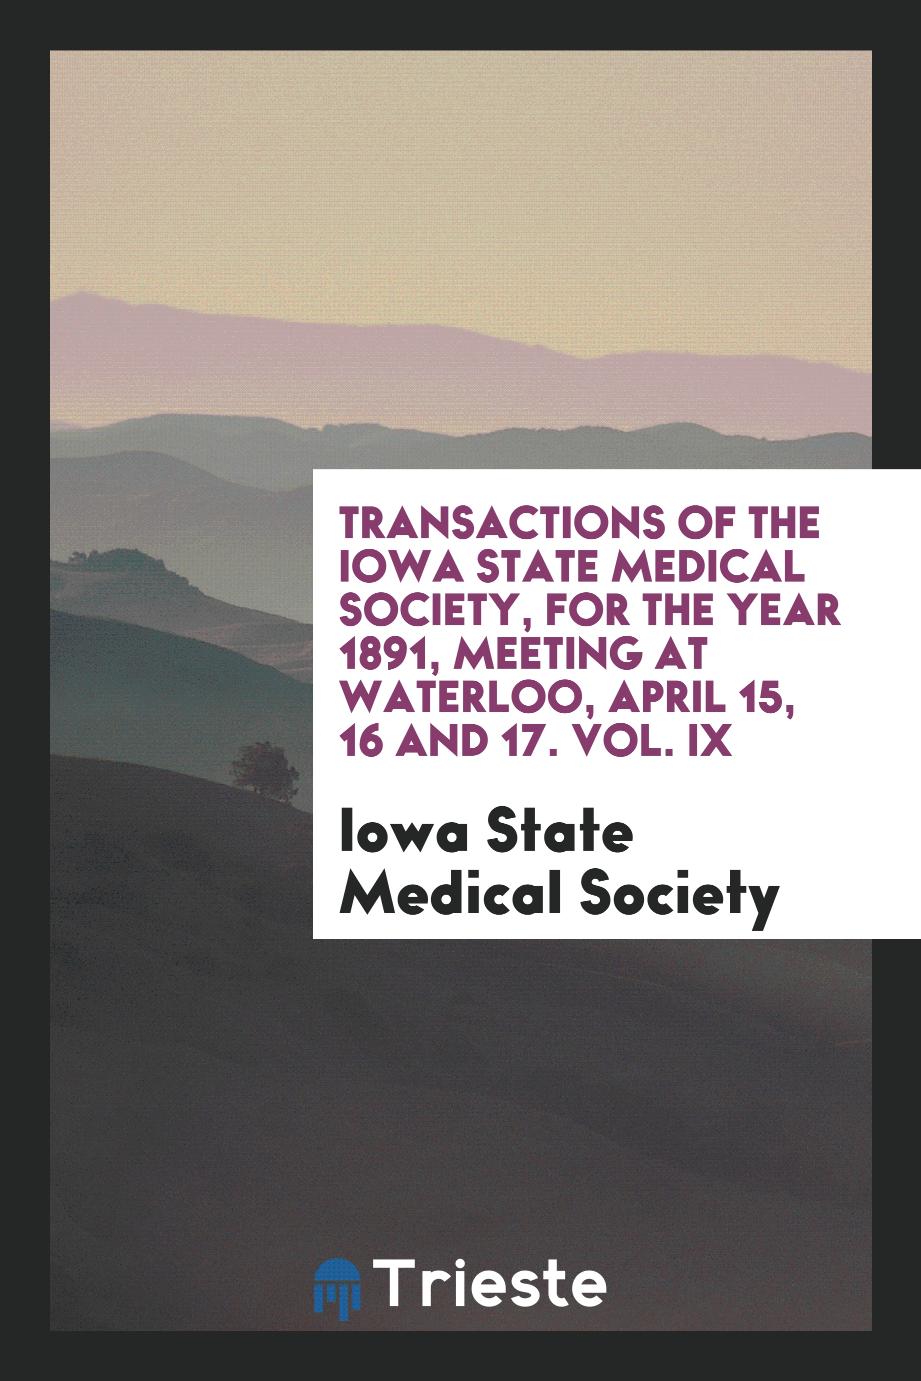 Transactions of the Iowa State Medical Society, for the Year 1891, Meeting at Waterloo, April 15, 16 and 17. Vol. IX